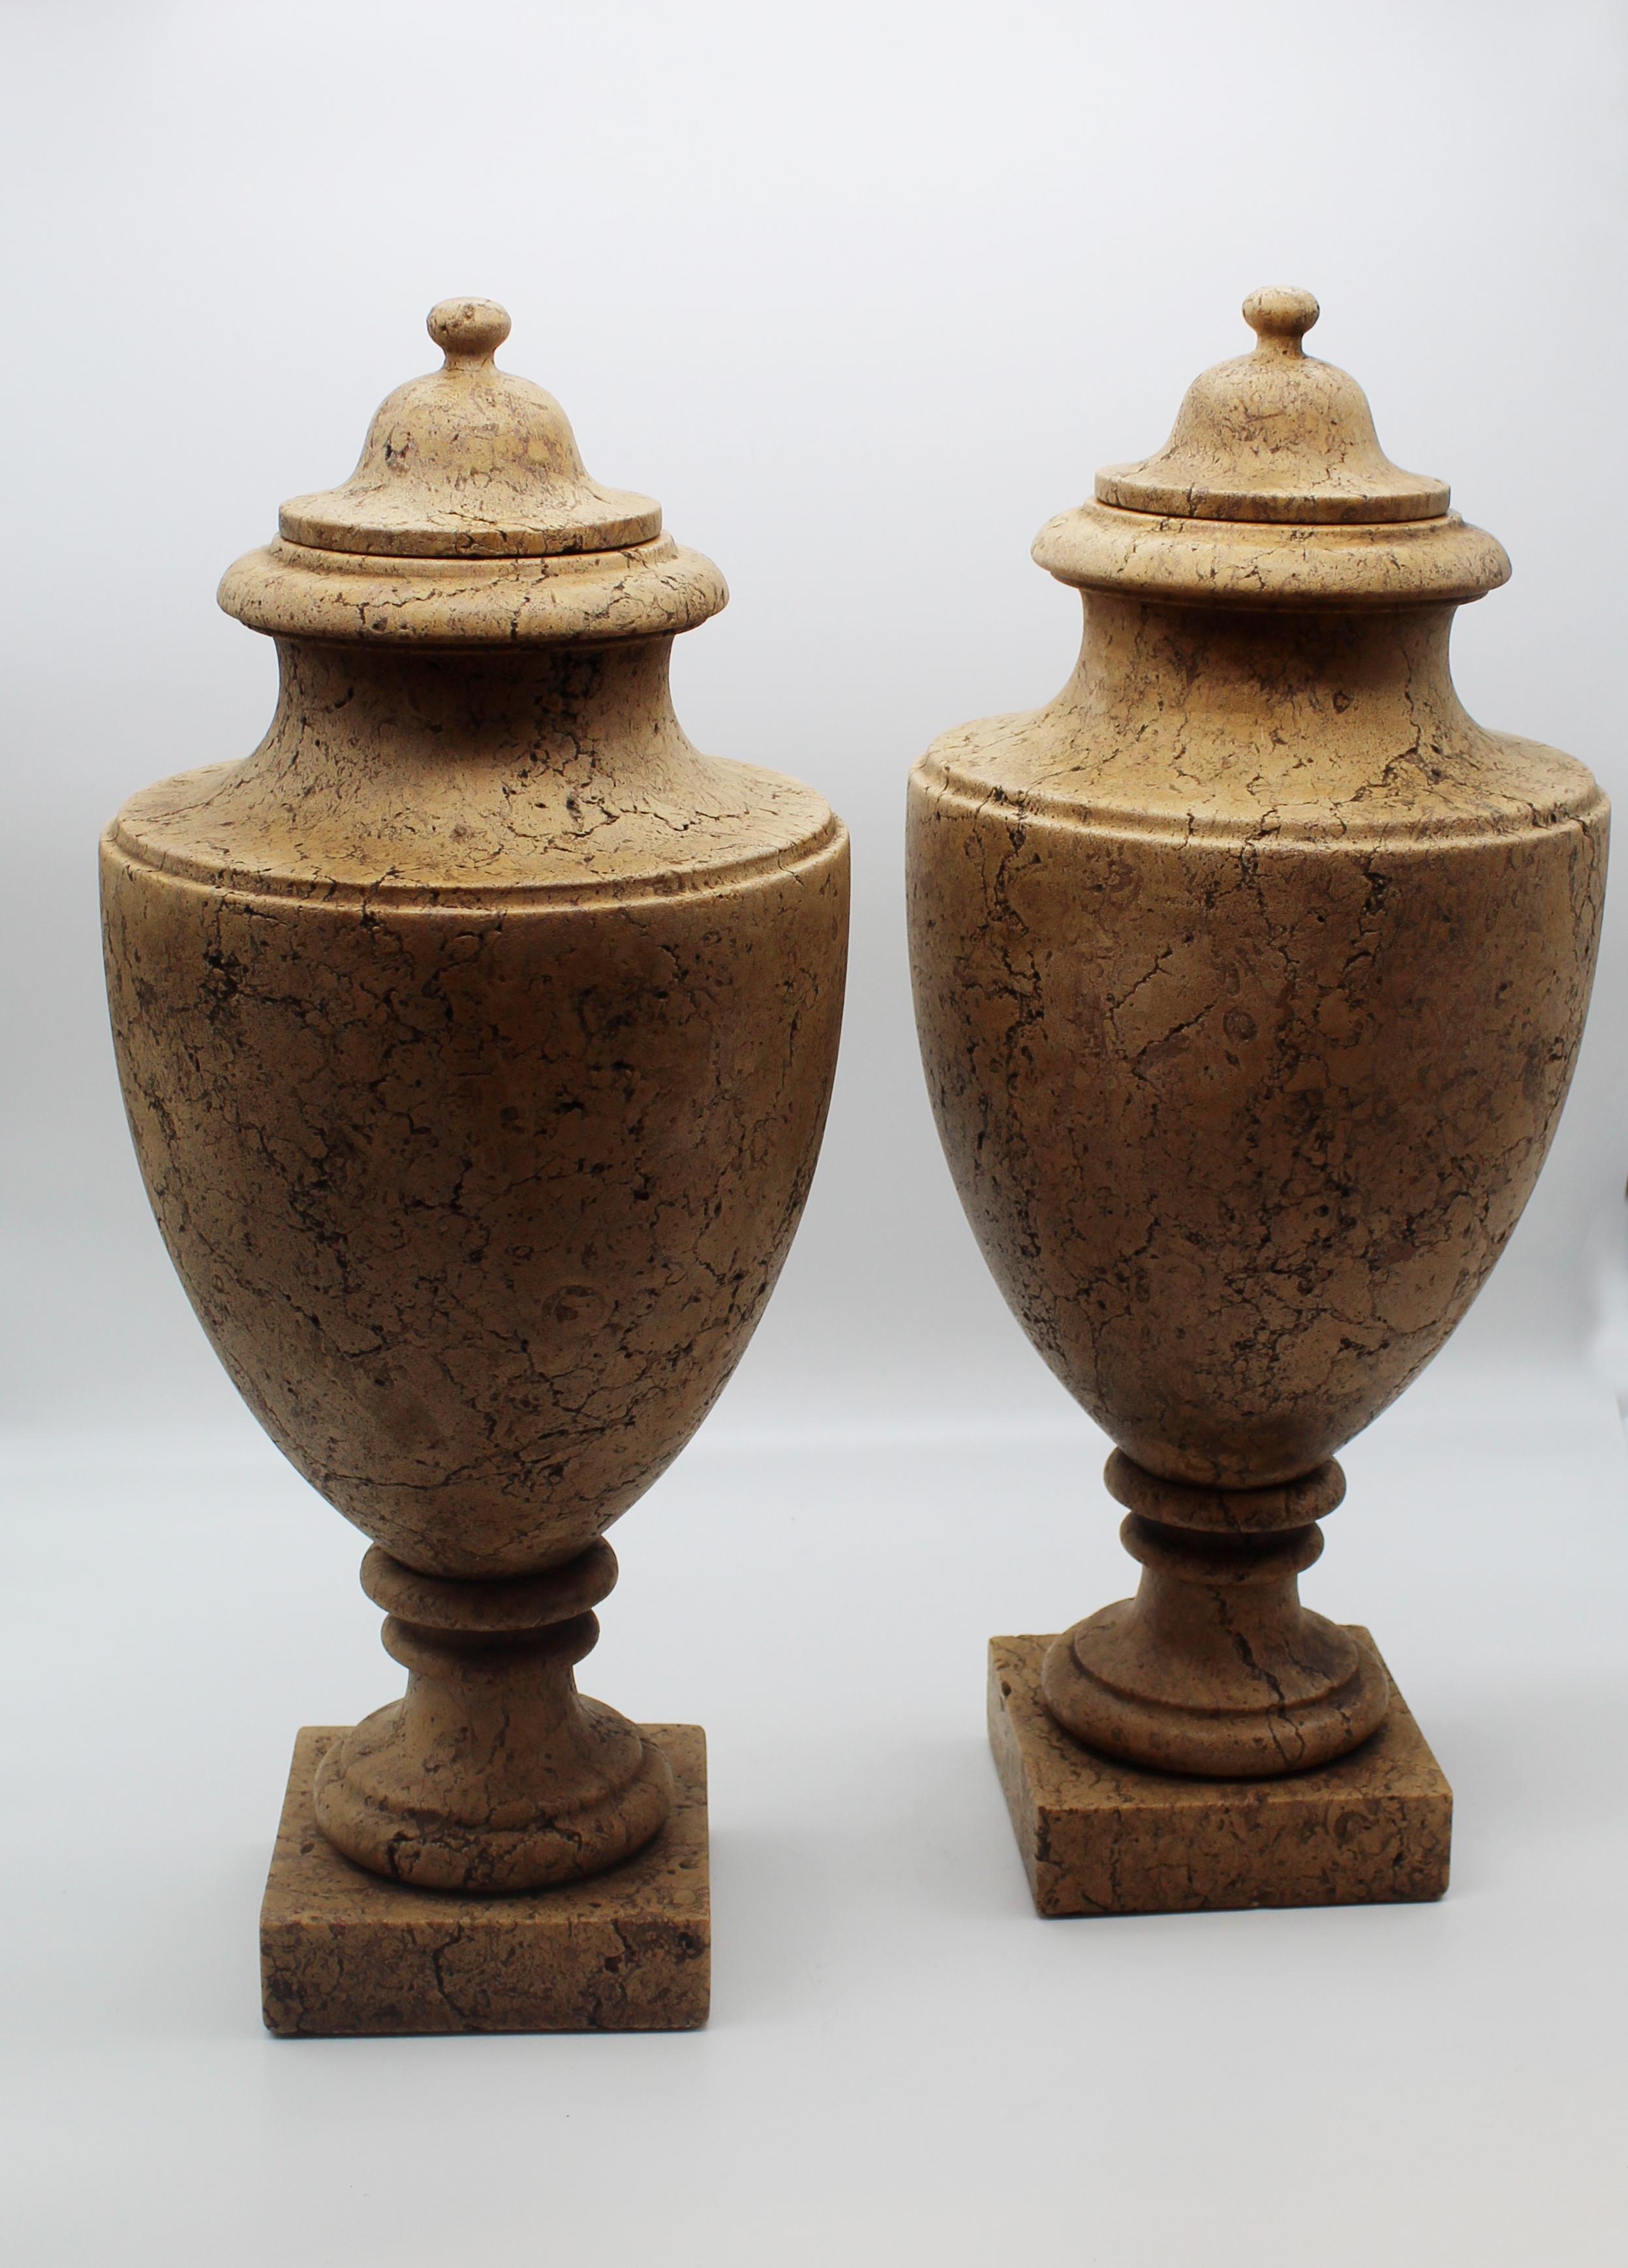 A very impressive pair of neoclassical vases made in Broccatello of Spain marble, one of the most exotic and precious marbles used by ancient times by romans for the high levels decorations elements and artworks. Used also during the renaissance and